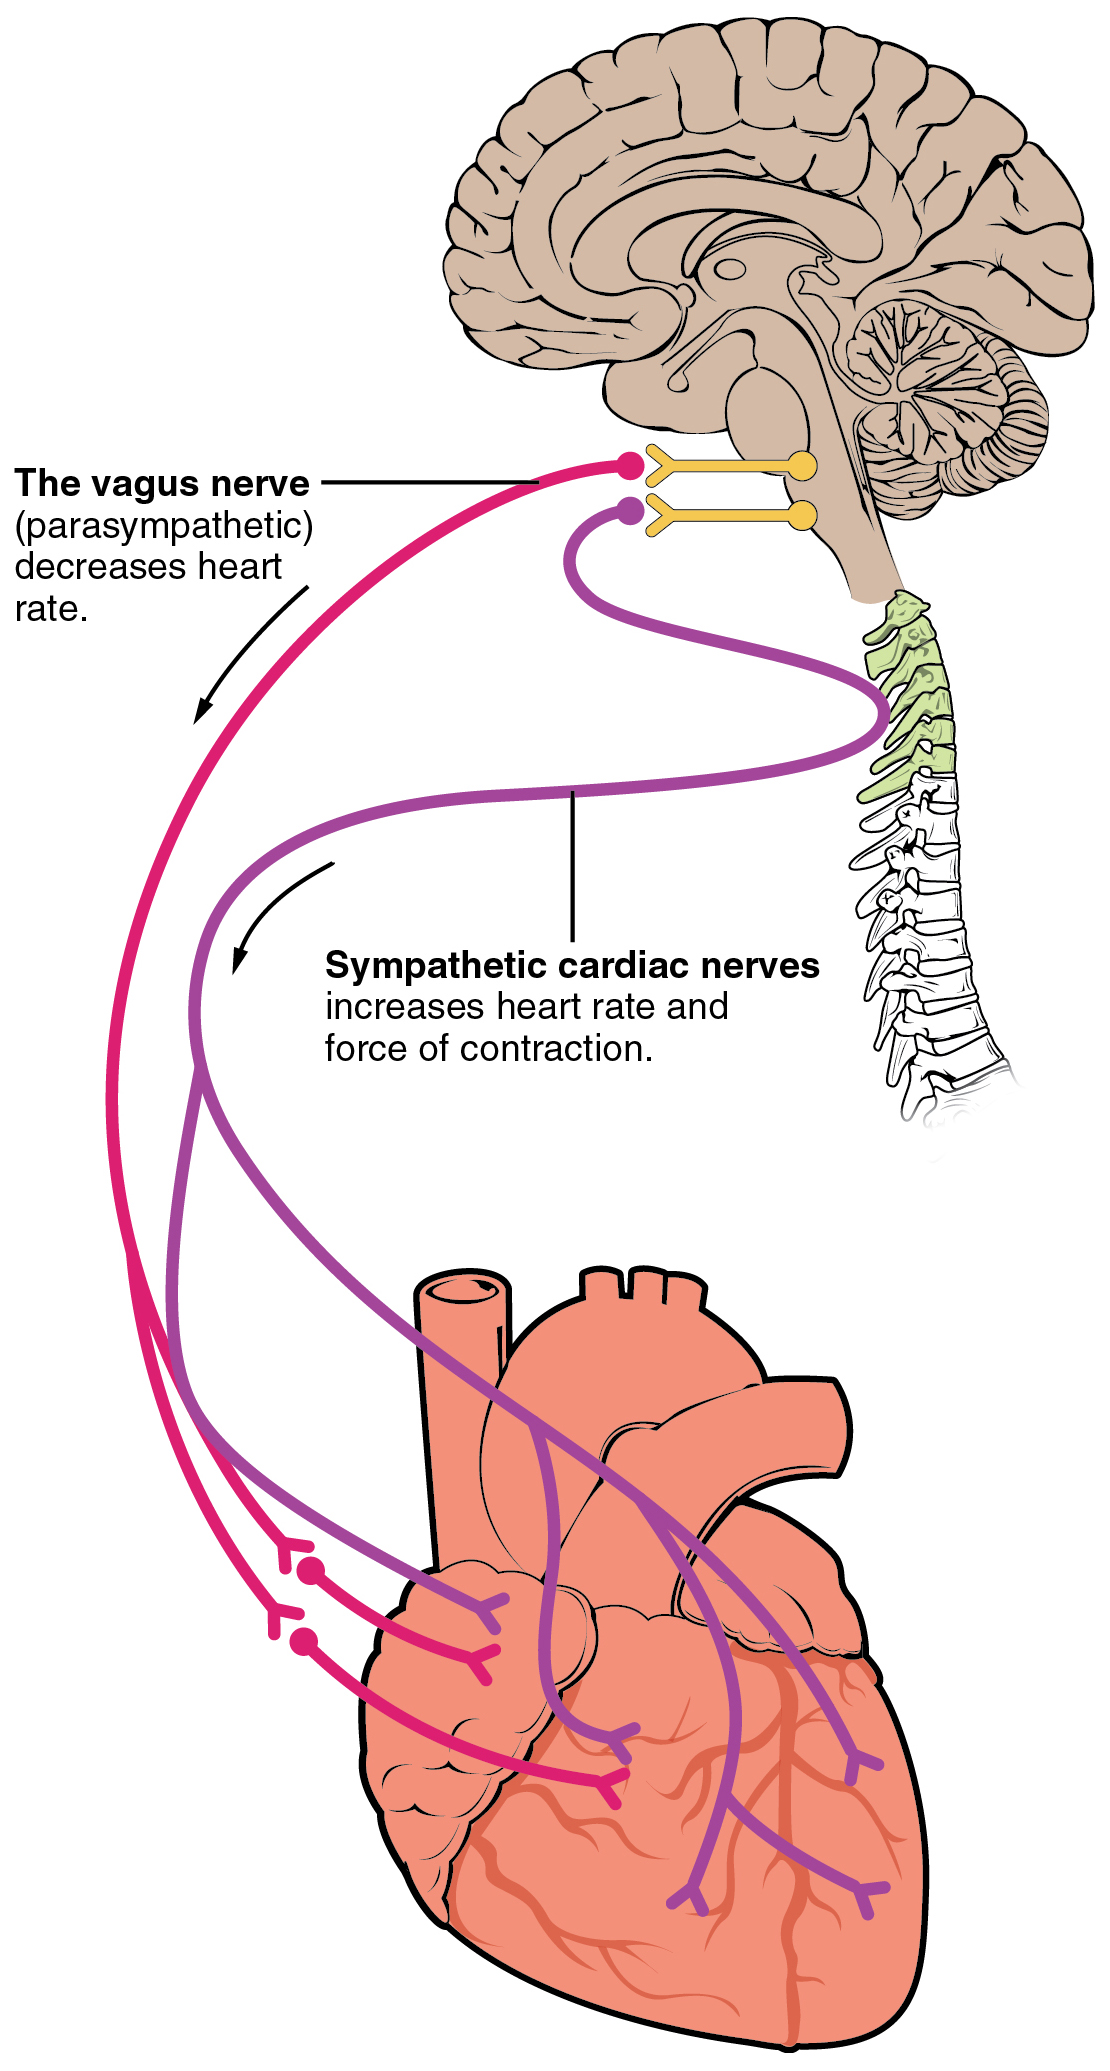 This figure shows the brain and the nerves connecting the brain to the heart.